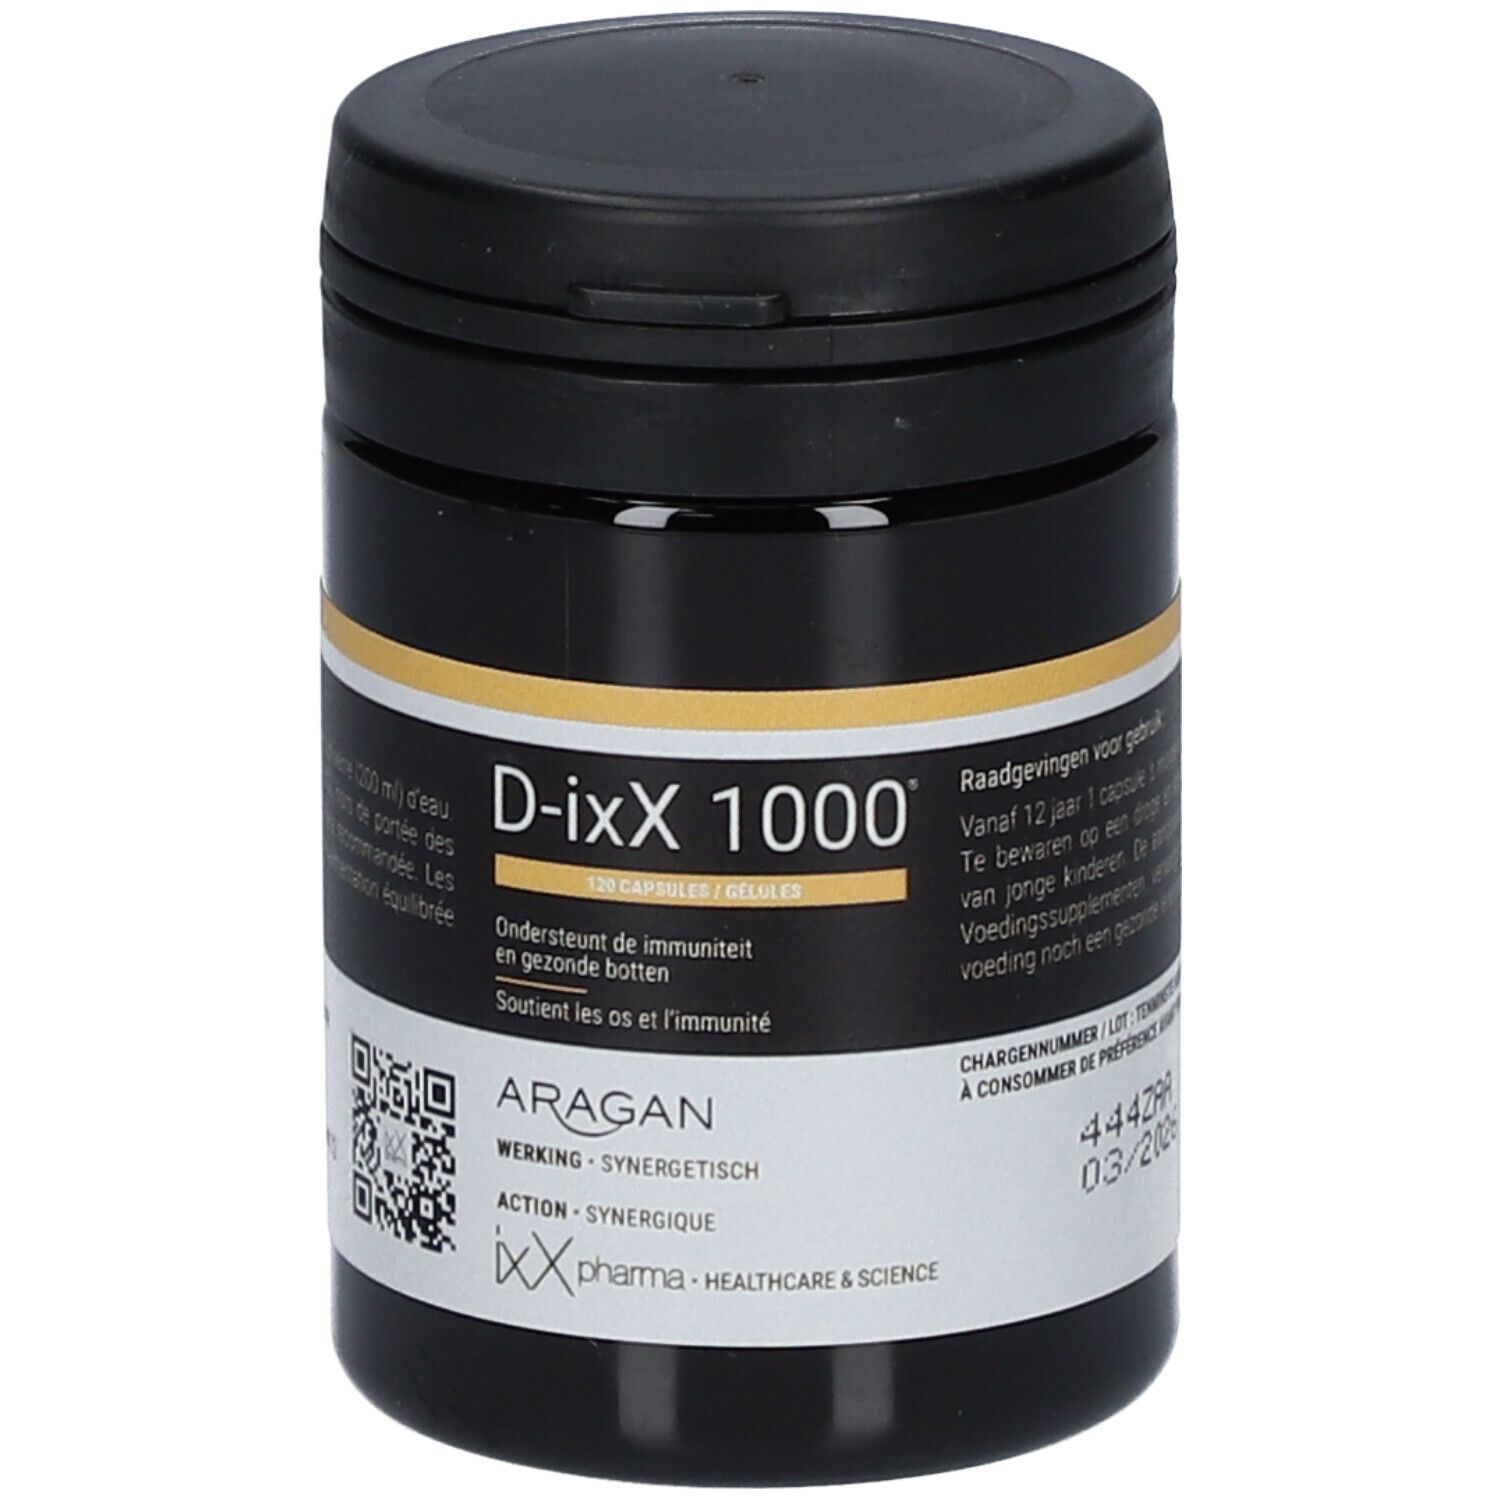 Image of D-ixX 1000